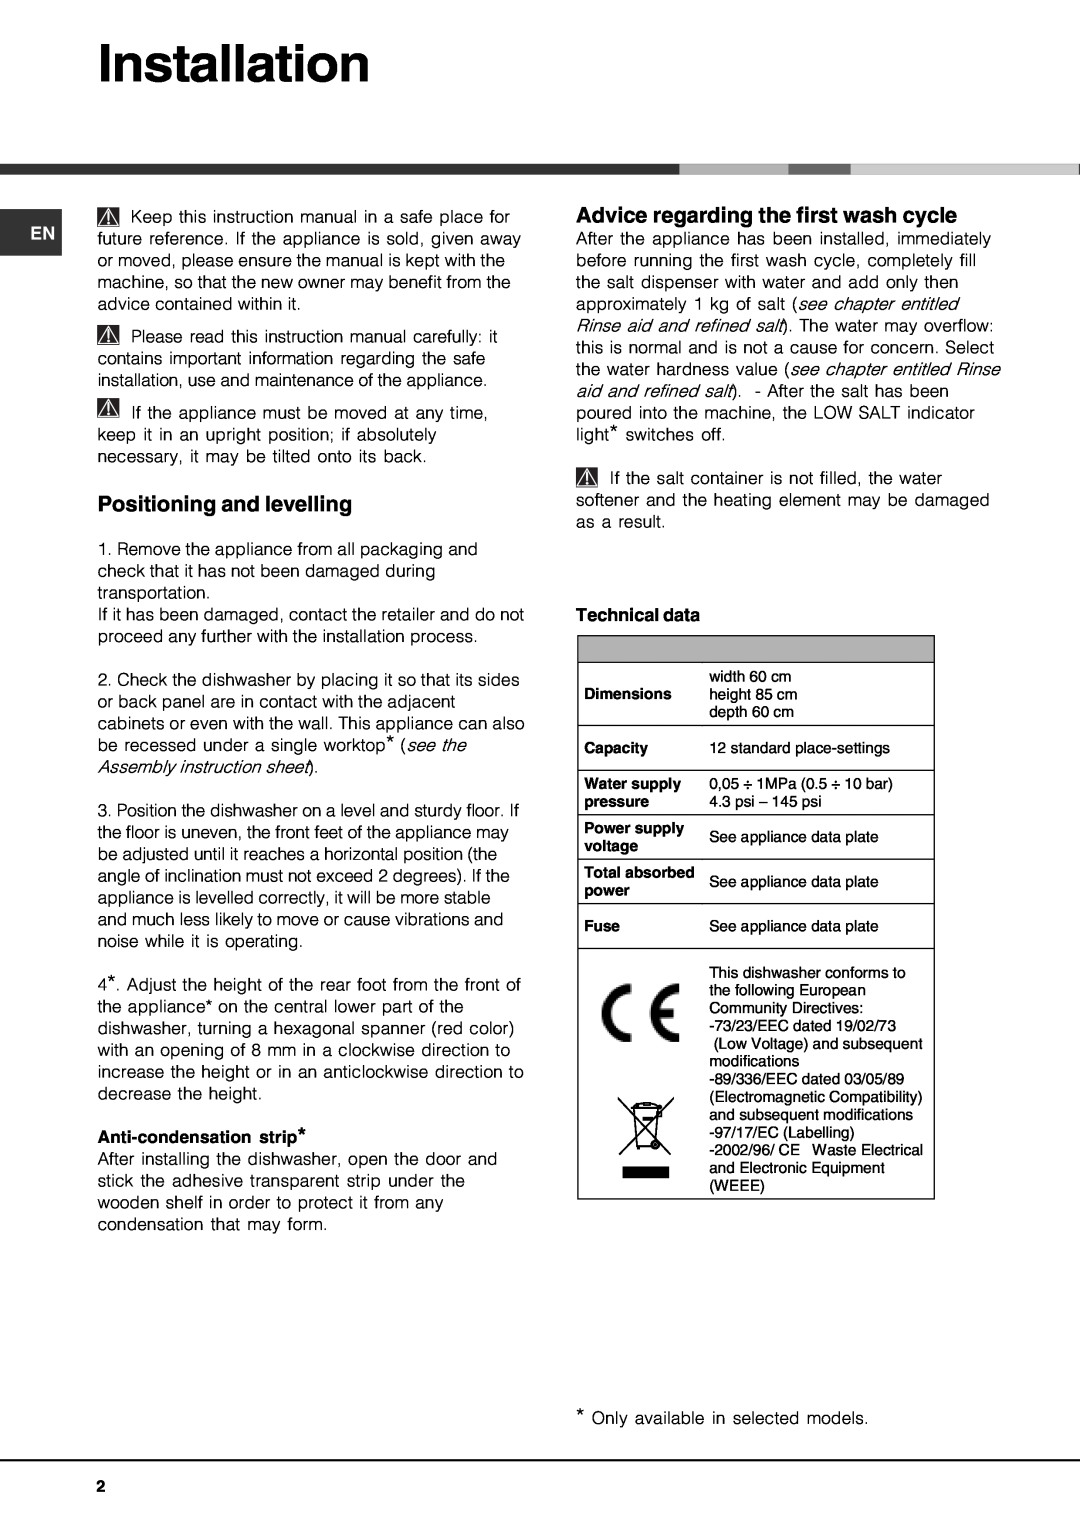 Hotpoint FDF-780 manual Installation, Positioning and levelling, Advice regarding the first wash cycle 